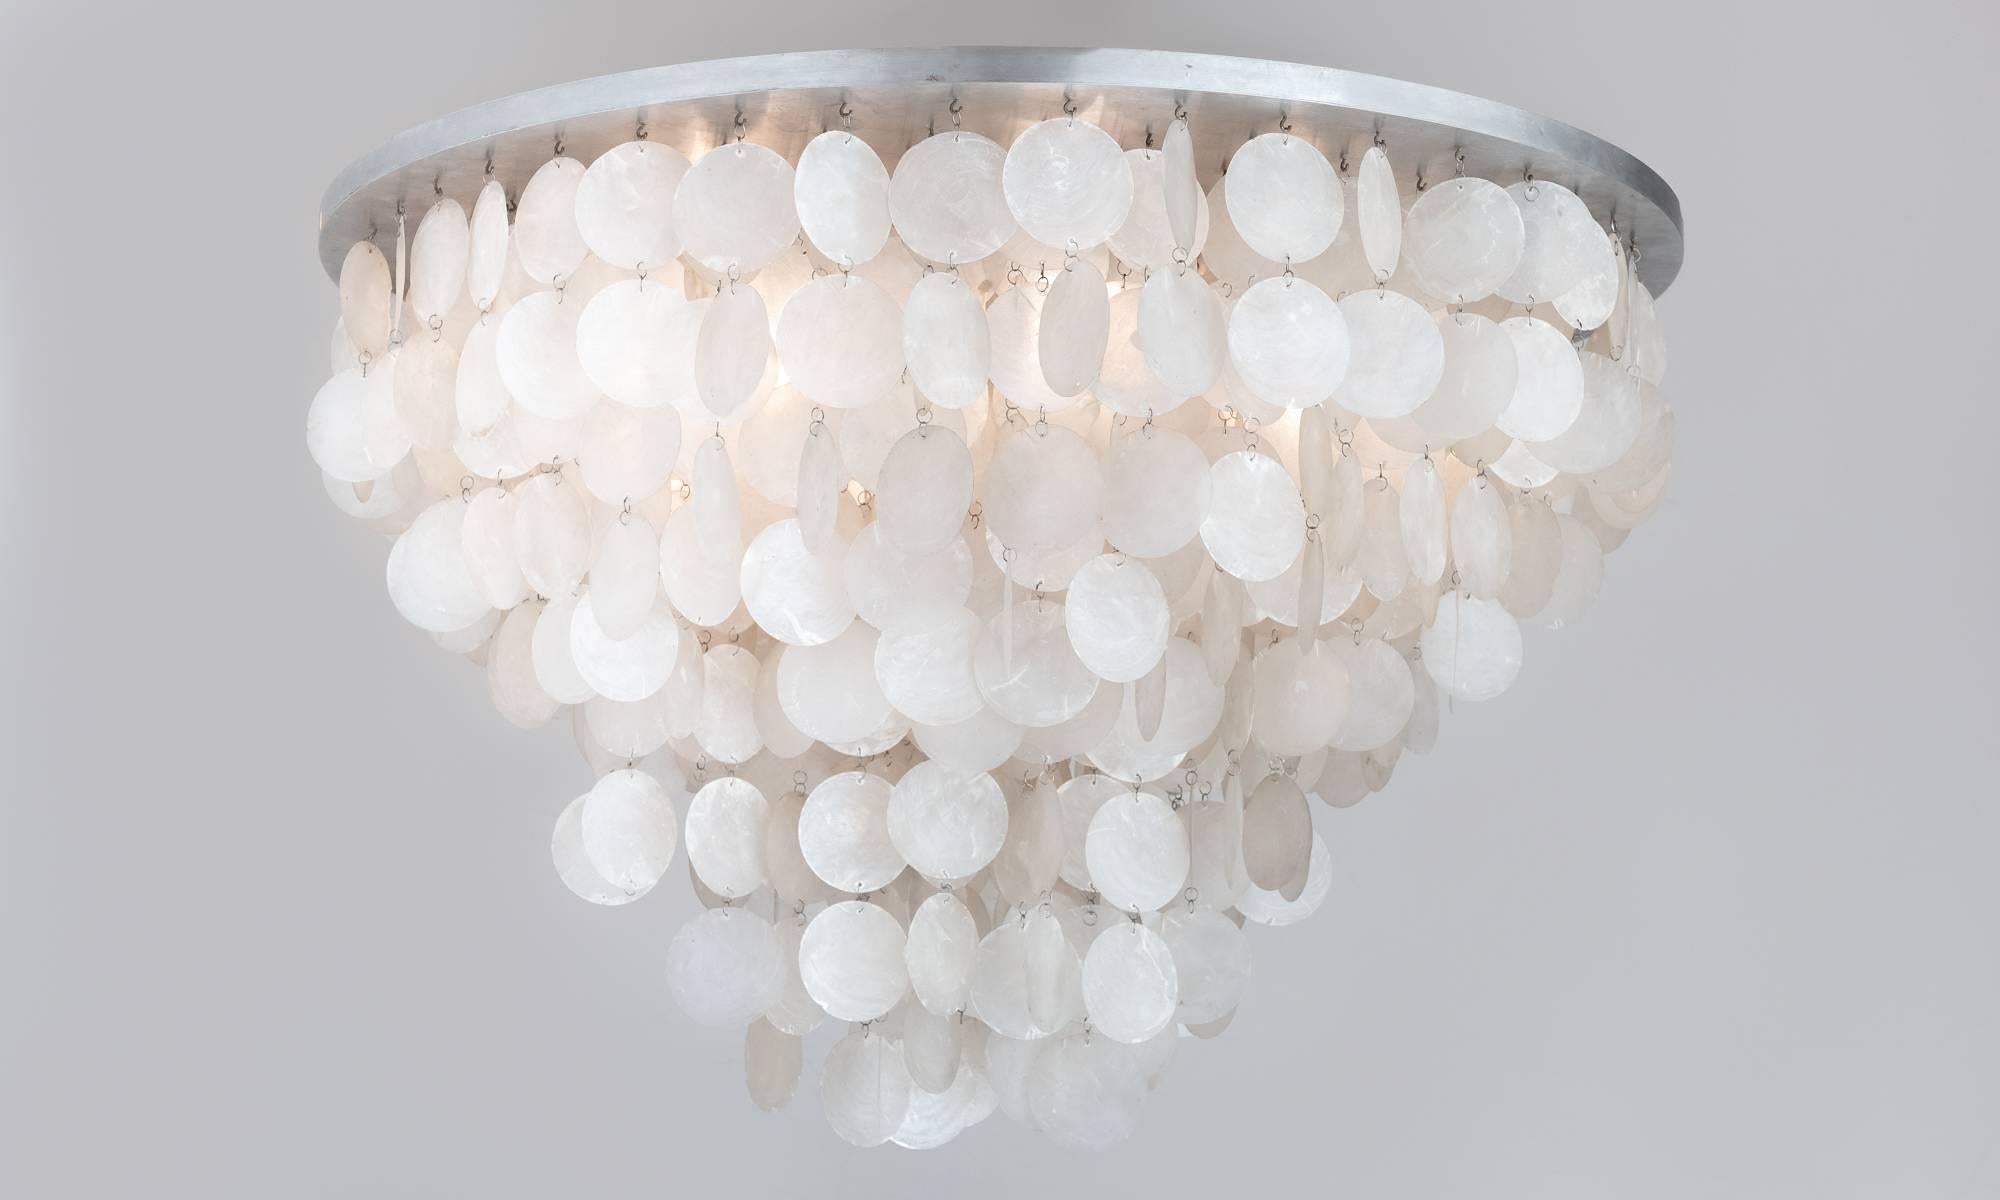 Verner Panton Fun Series Chandelier.

Suspended mother-of-pearl discs create an elegant form designed by Verner Panton and made by Luber.

35